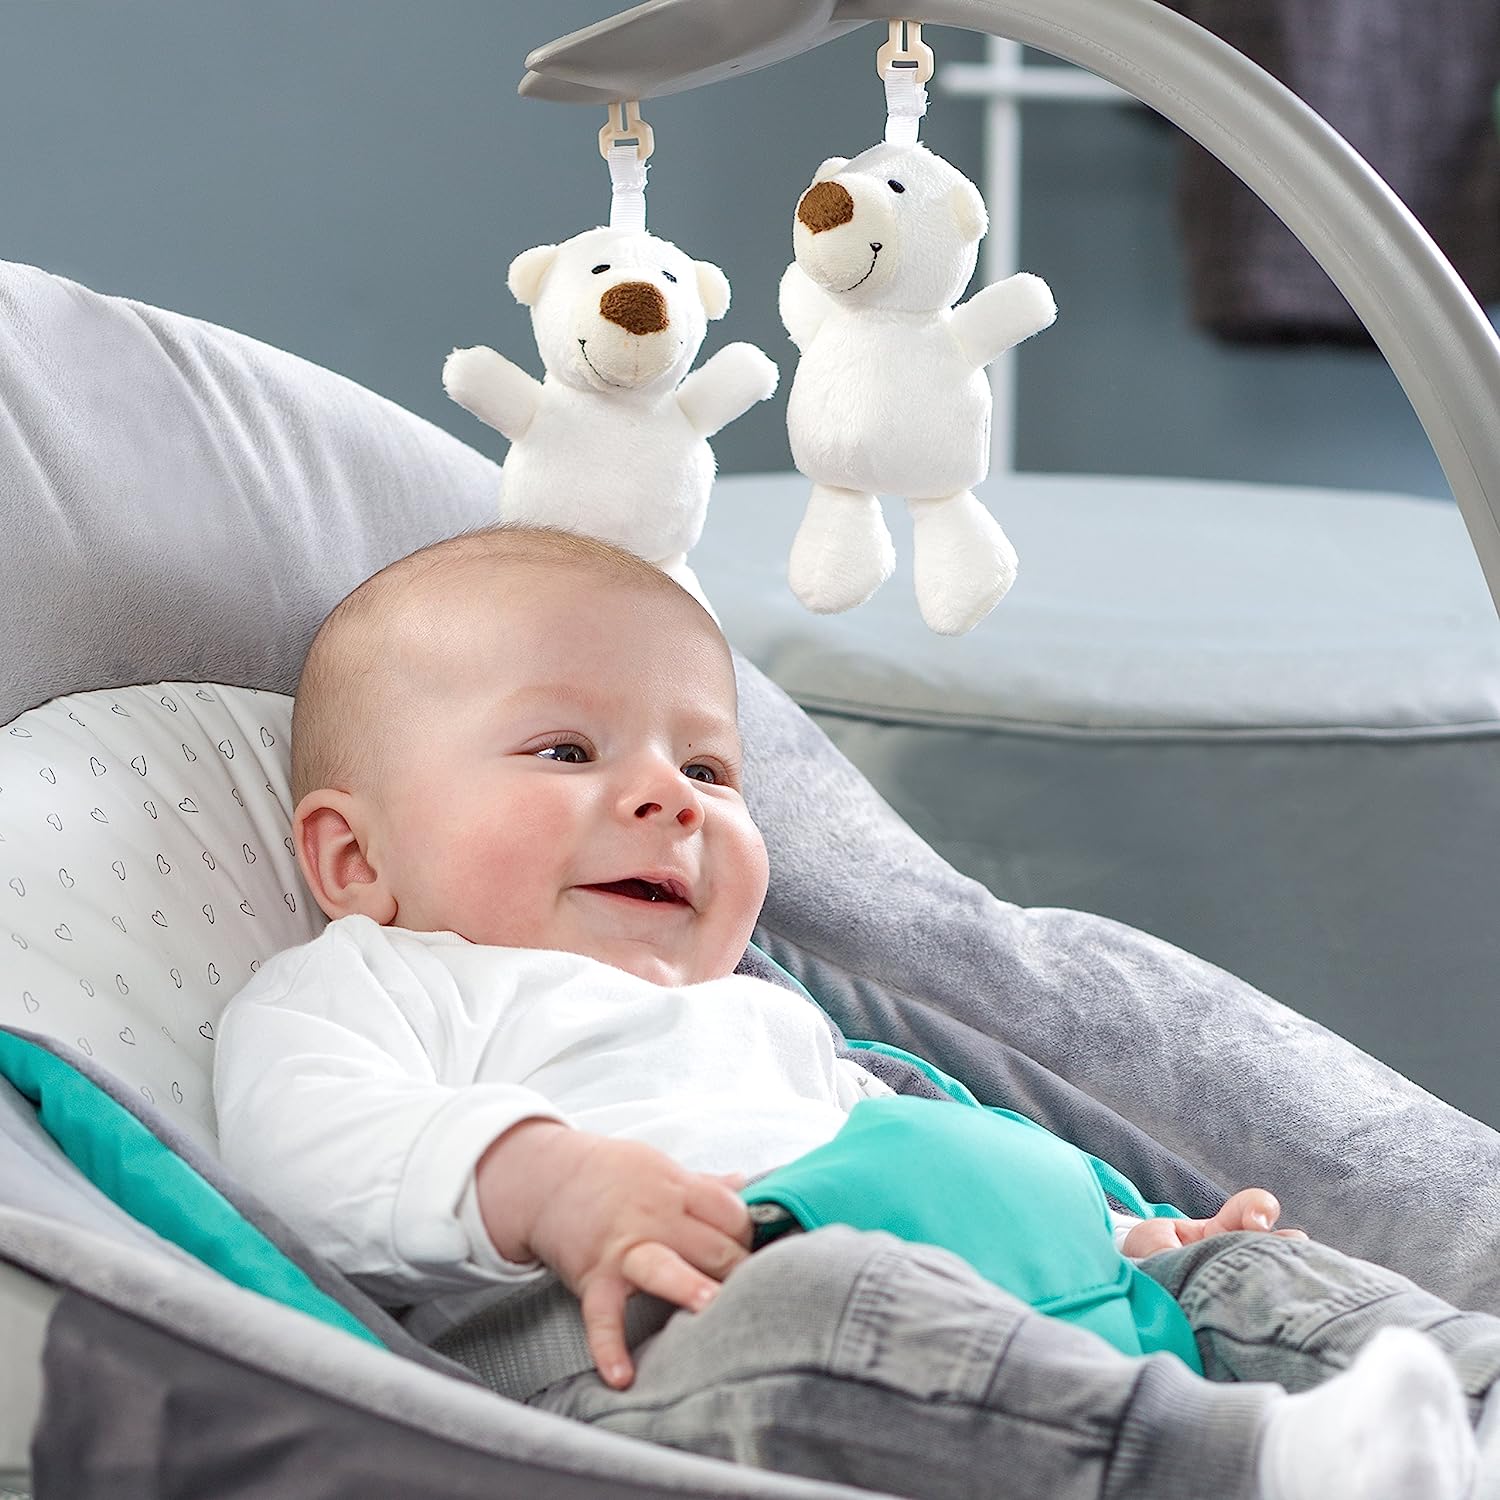 Hauck Leisure baby rocker / rocking function / removable play arch and teddy bear as a seat reducer / can be used from birth to 9 kg / tilt-proof and portable / hearts (grey)